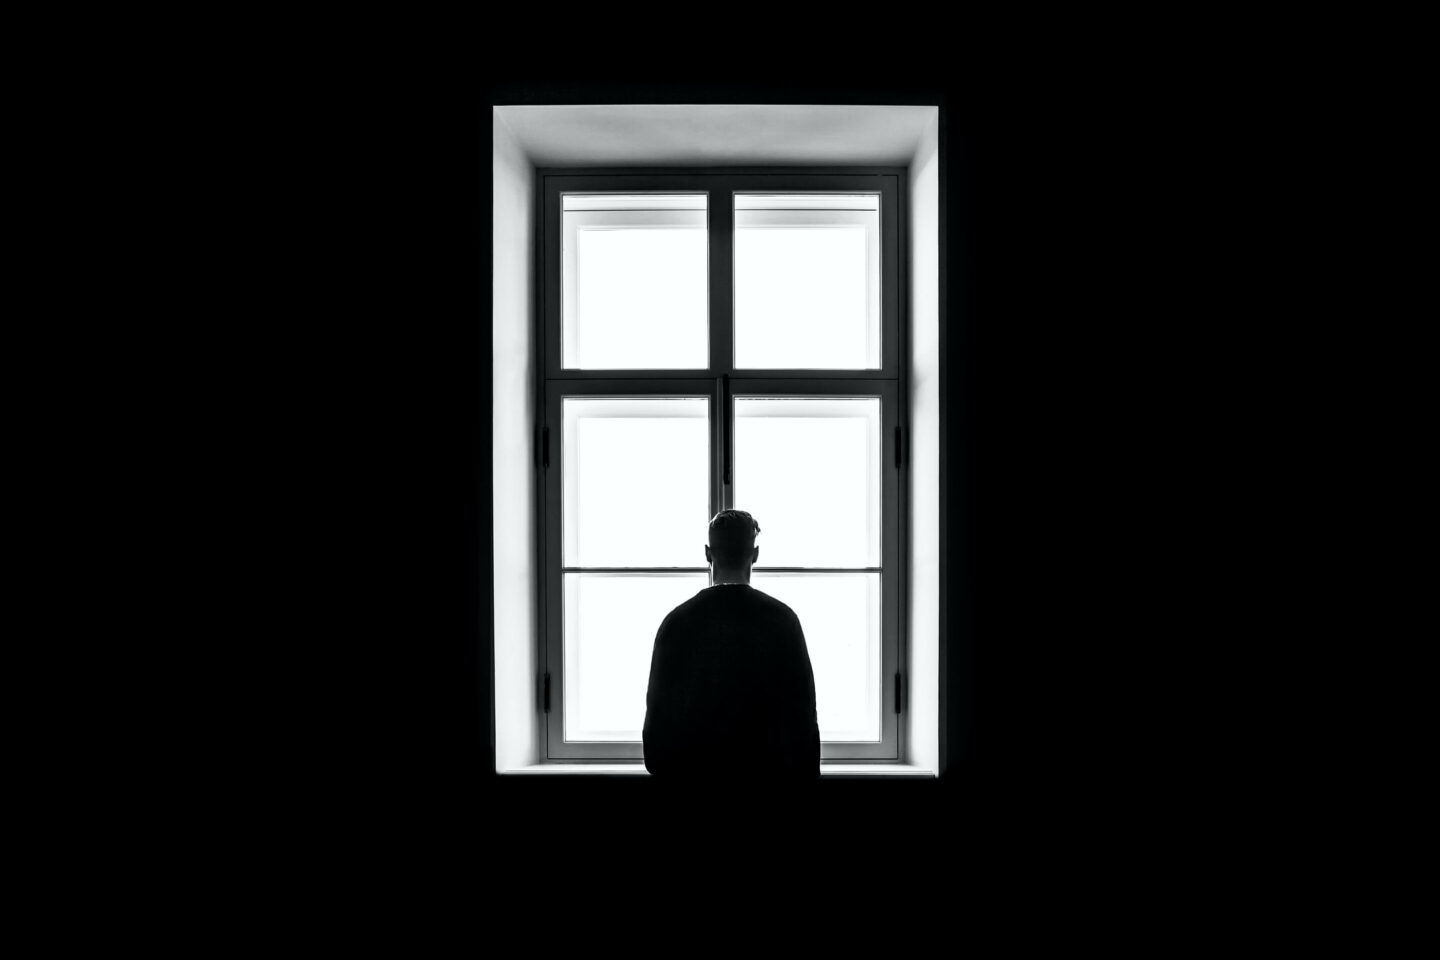 Silhouette of man looking out of window